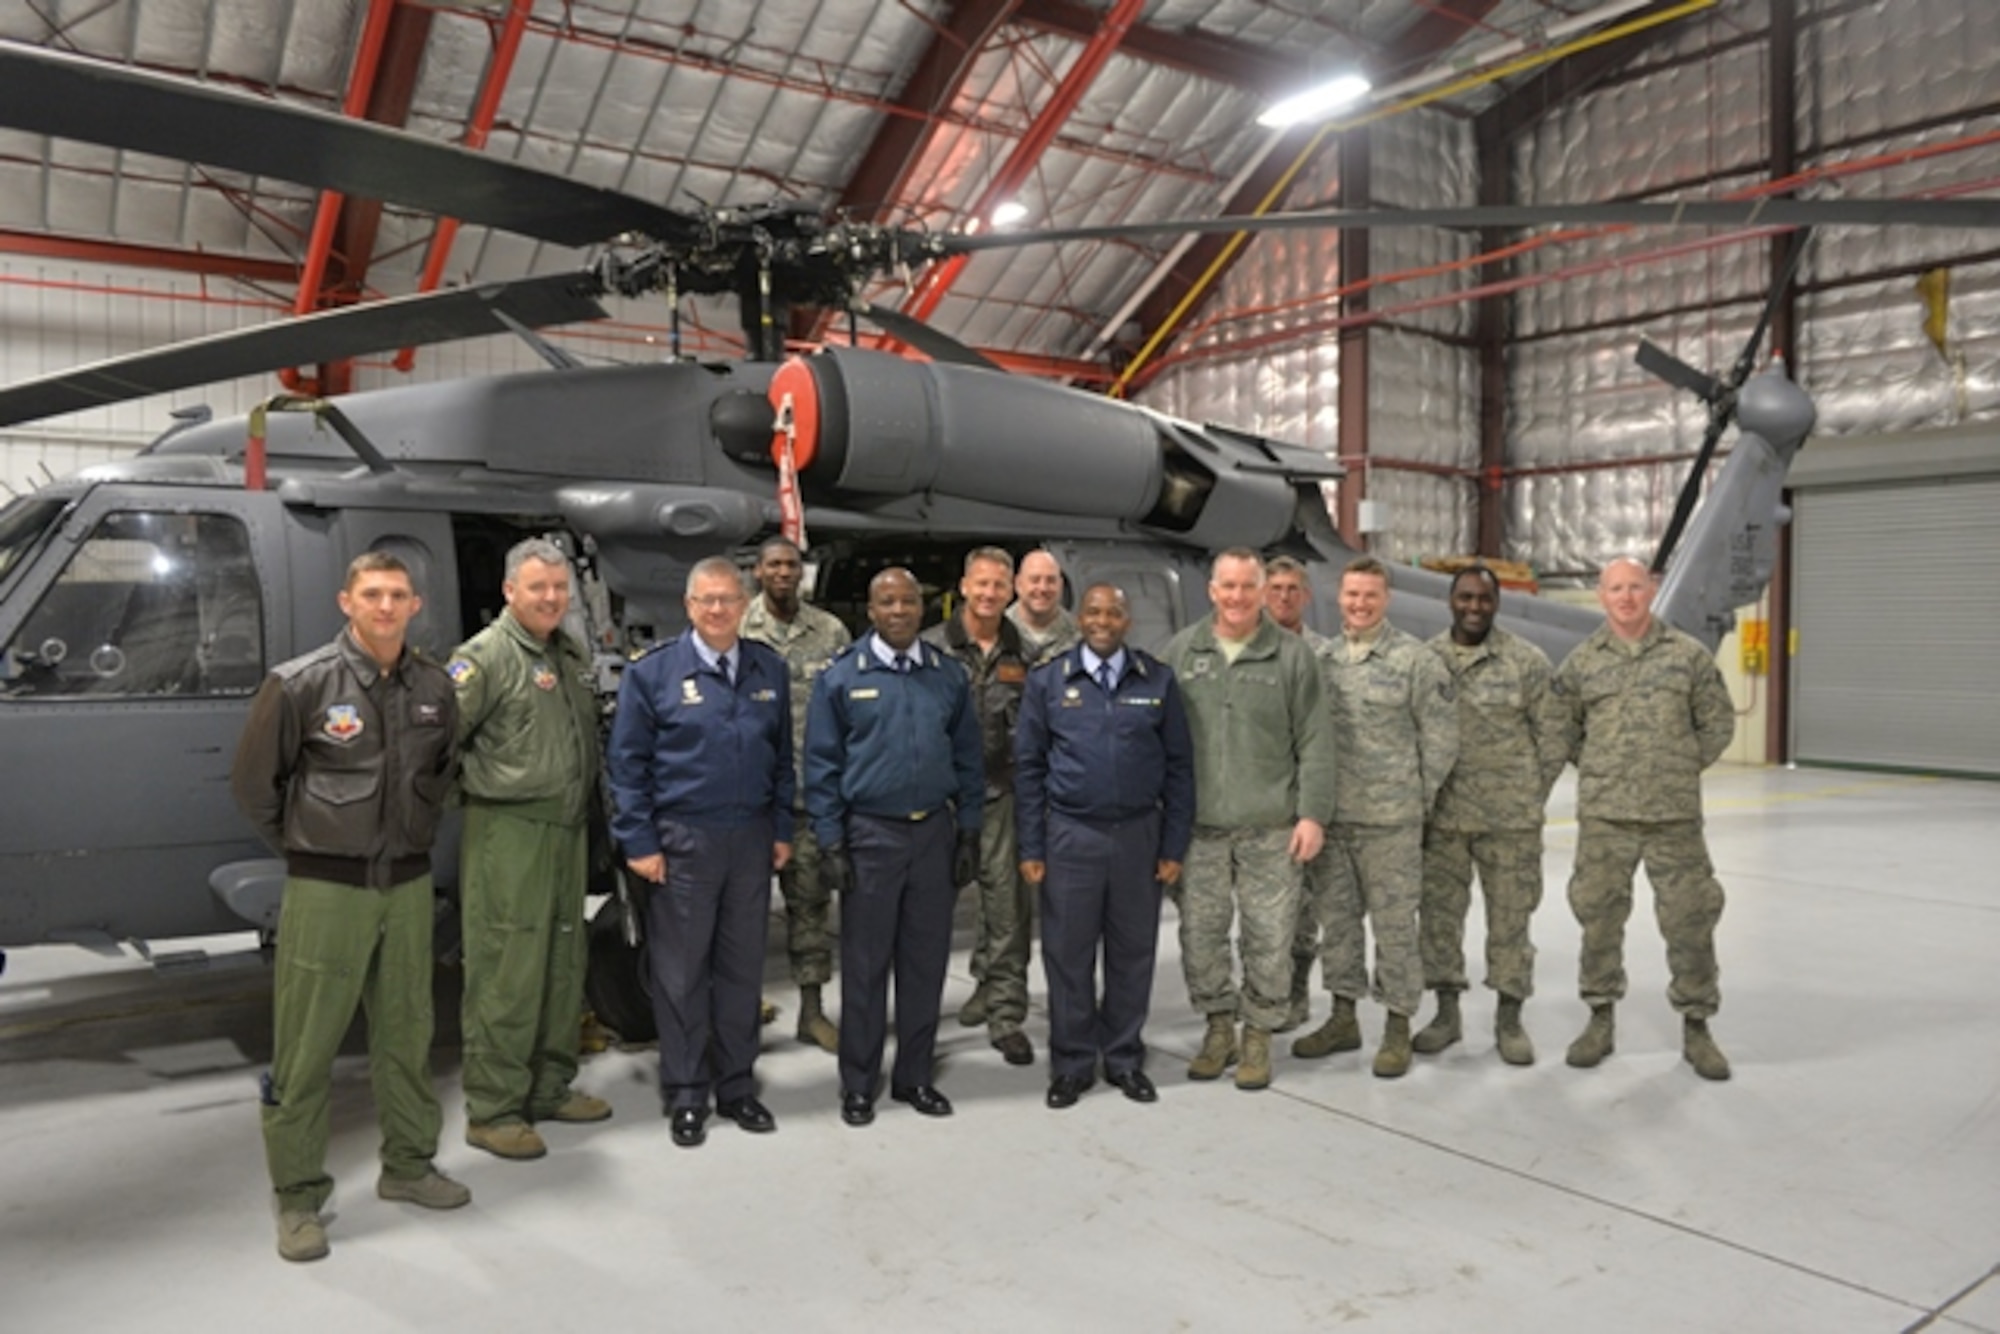 WESTHAMPTON BEACH, NY- Members of the South African National Defence Forces, 106th Rescue Wing commader and members pose with the 106th Rescue Wing's HH-60 Pavehawk helicopter.

Maj. Gen. Mbambo and Brig. Gen. Mashoro Phala visited the 106th Rescue Wing in Westhampton Beach, New York, as part of the South African Natioanl Defence Force's State Partnership Program relationship with the New York Natioanal Guard.

(New York Air National Guard/ Airman 1st Class Mark Weiss/ released)